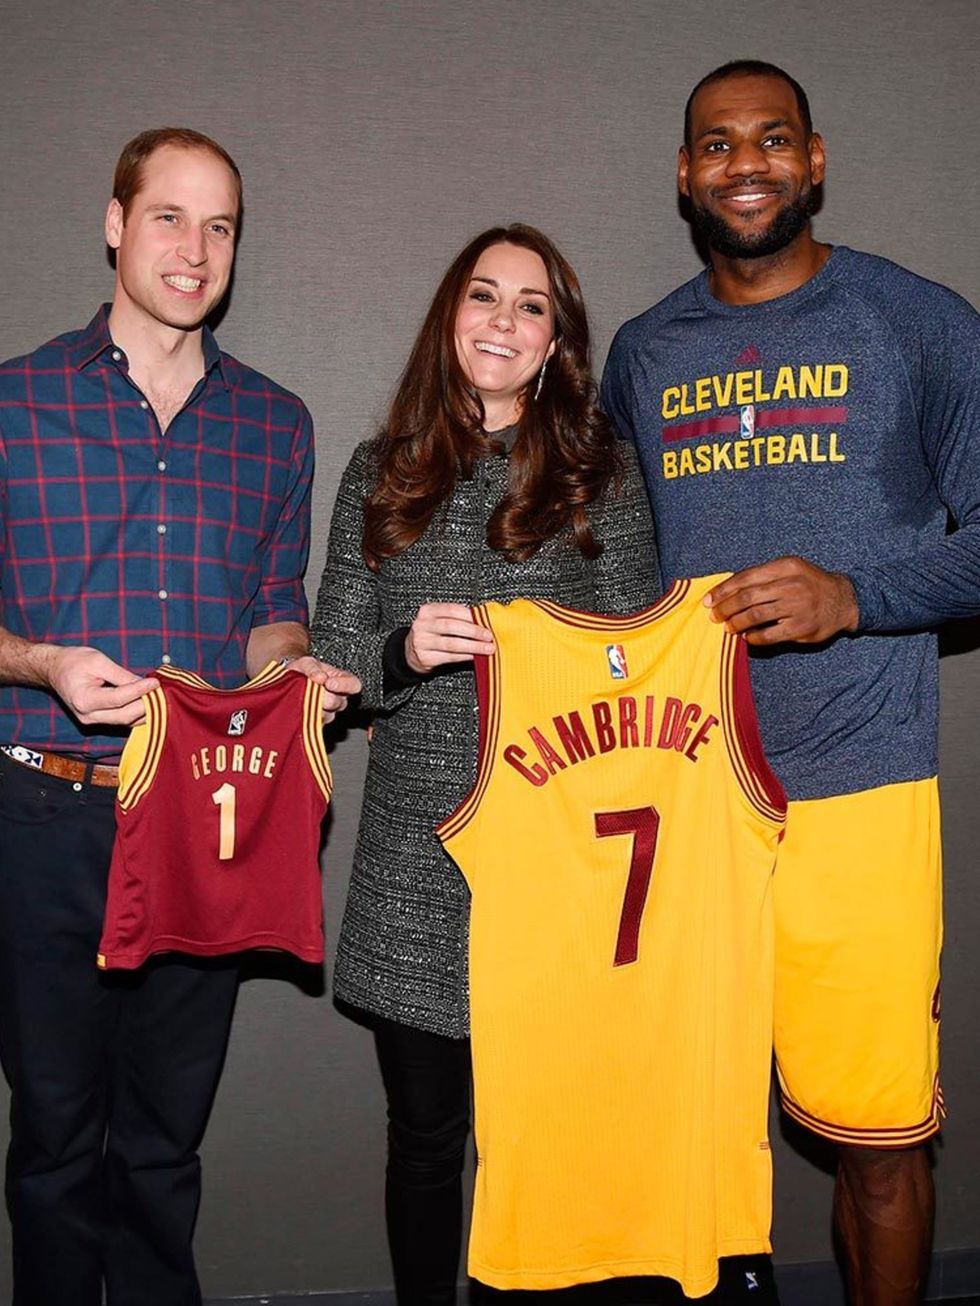 <p>3. When LeBron James gave Kate an against-protocol sweaty embrace, and Kate didn't flinch.</p>

<p><span style="font-size:13px; line-height:1.6">Kate Middleton Prince William and LeBron James at the Cleveland Cavaliers vs. Brooklyn Nets game in New Yor